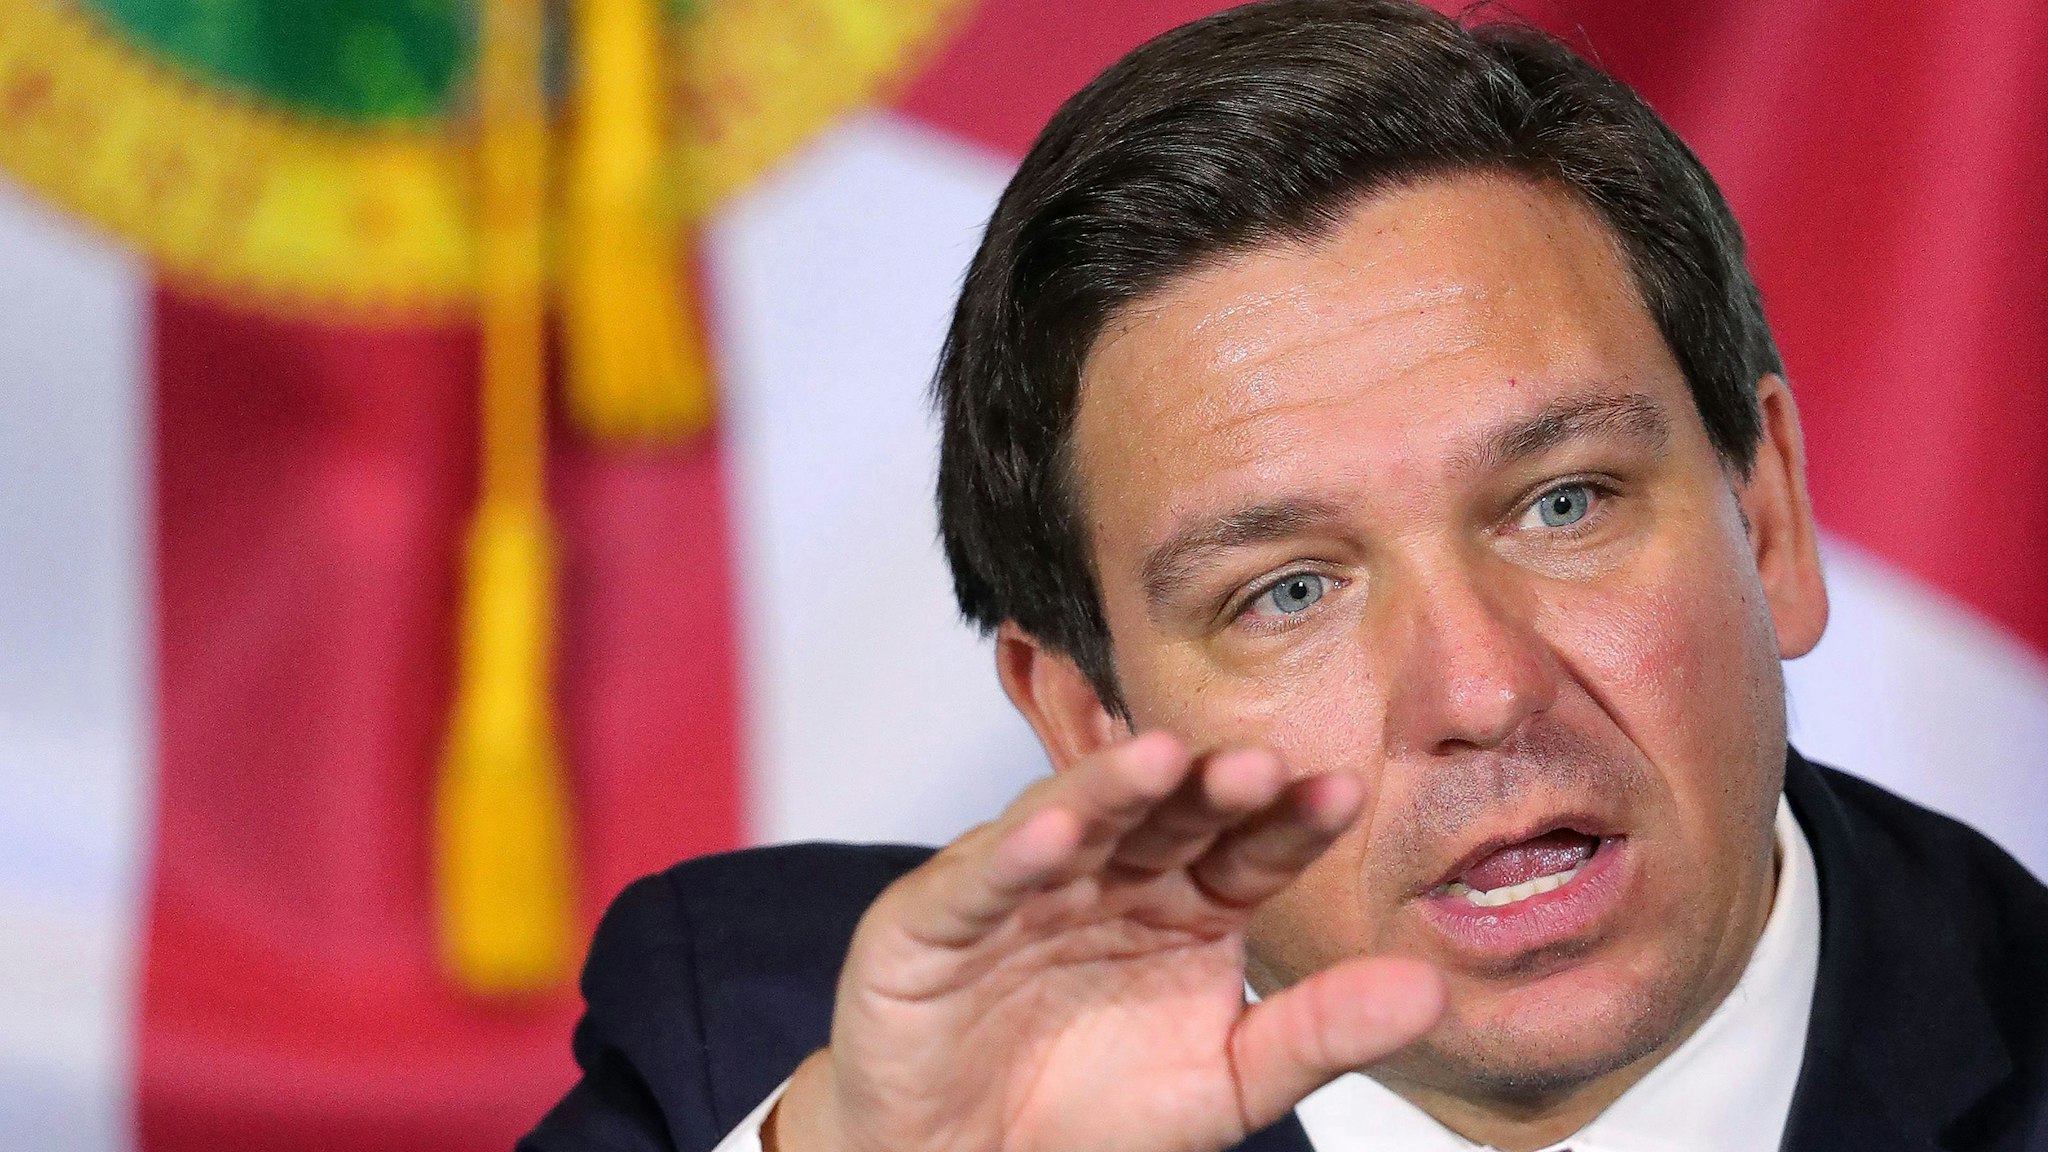 Florida Gov. Ron DeSantis delivers remarks during a roundtable discussion in Orlando, Florida, on August 26, 2020.